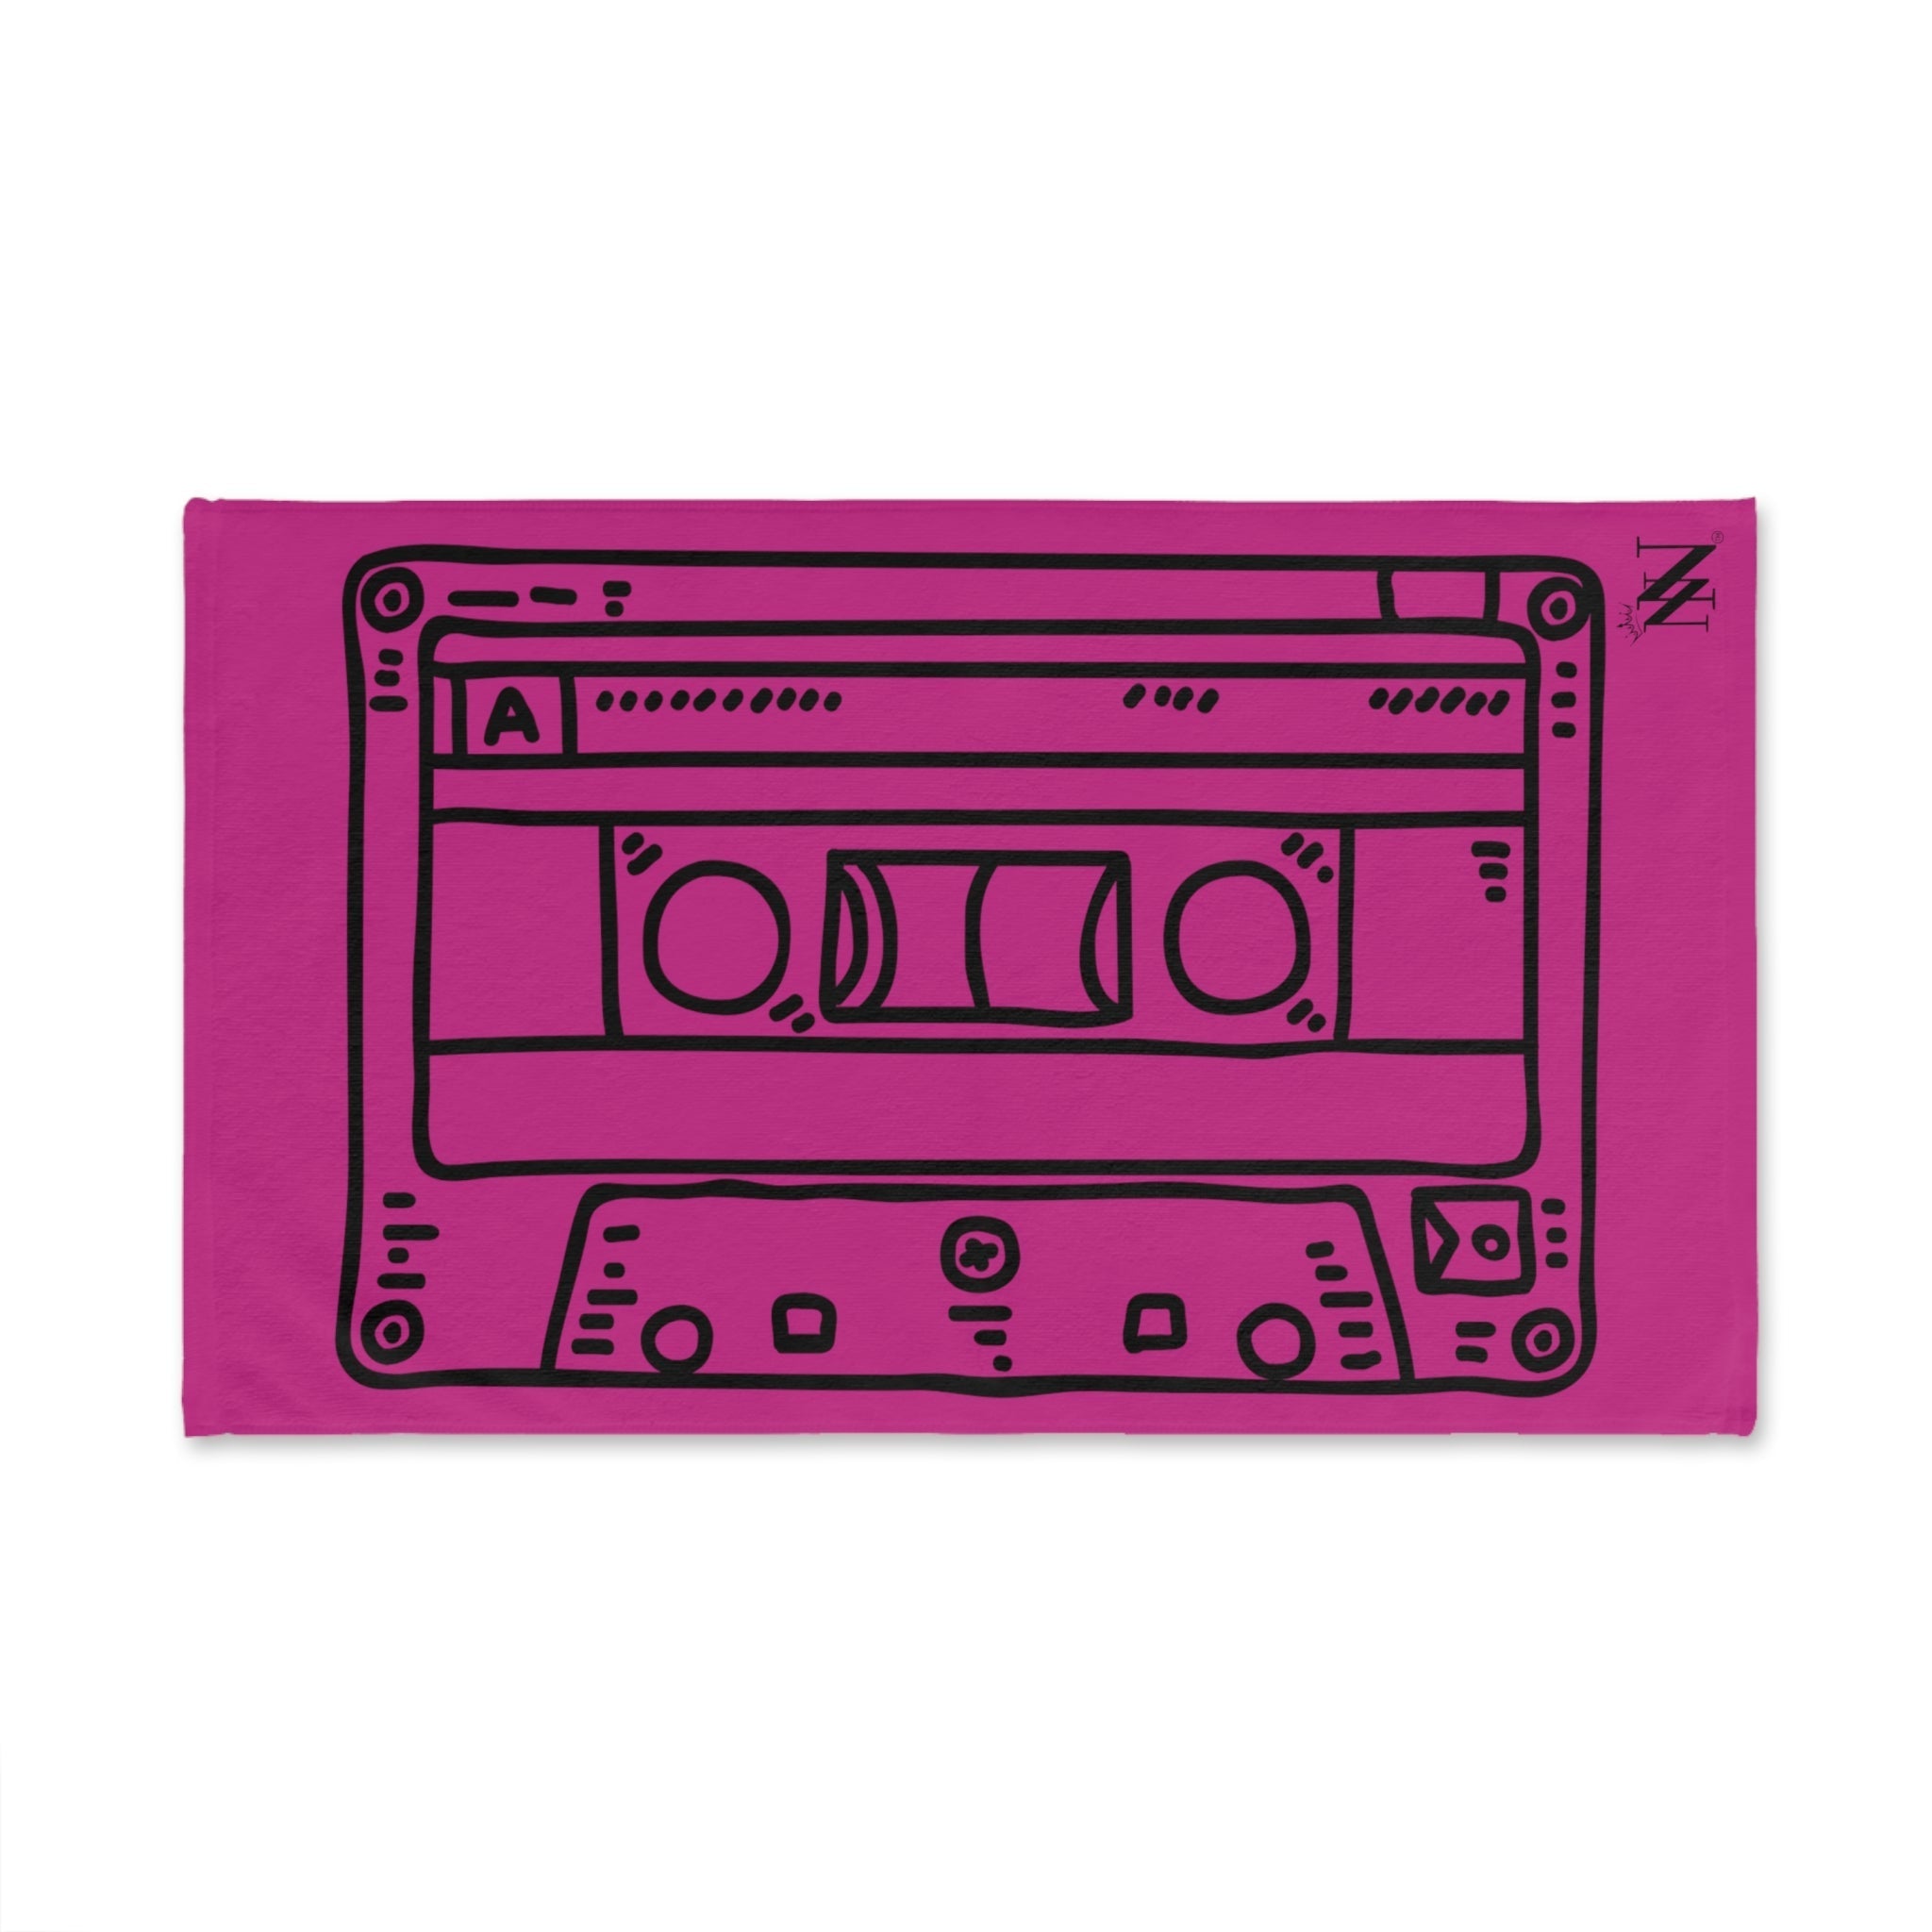 Cassette Black 80s Fuscia | Funny Gifts for Men - Gifts for Him - Birthday Gifts for Men, Him, Husband, Boyfriend, New Couple Gifts, Fathers & Valentines Day Gifts, Hand Towels NECTAR NAPKINS